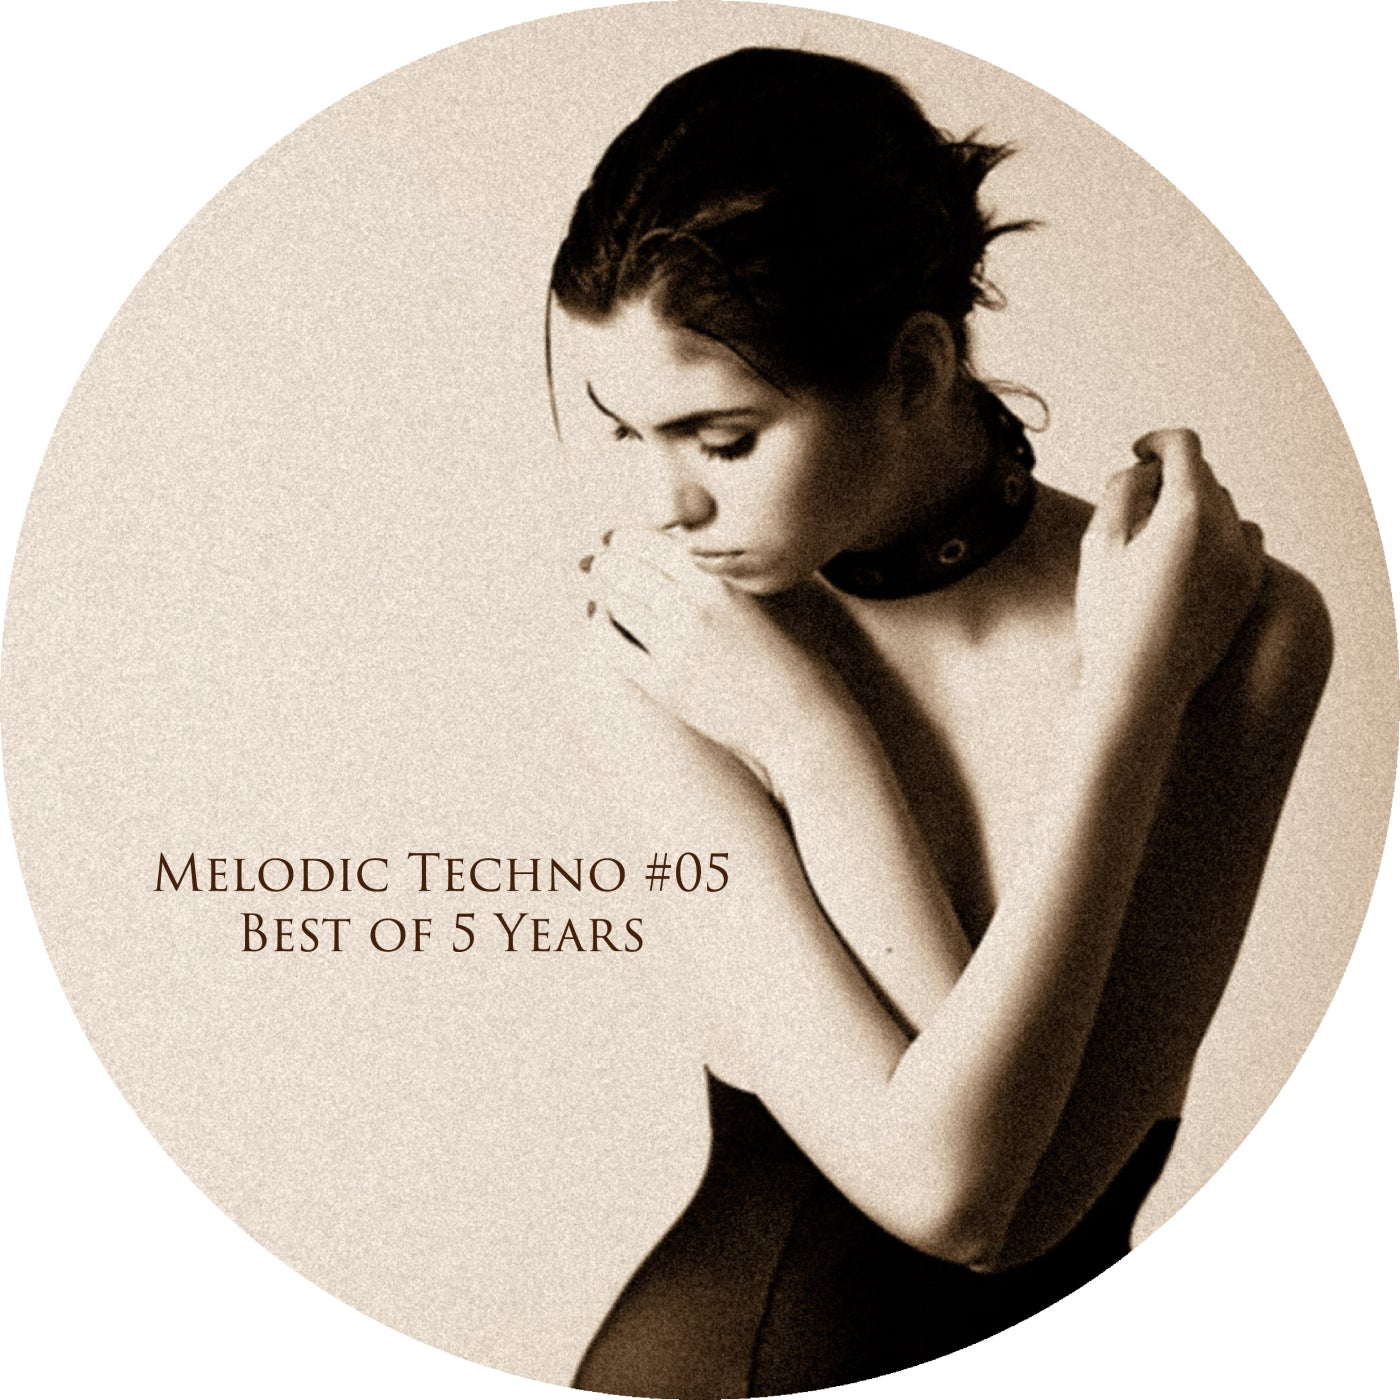 Melodic Techno #05- Best of 5 Years